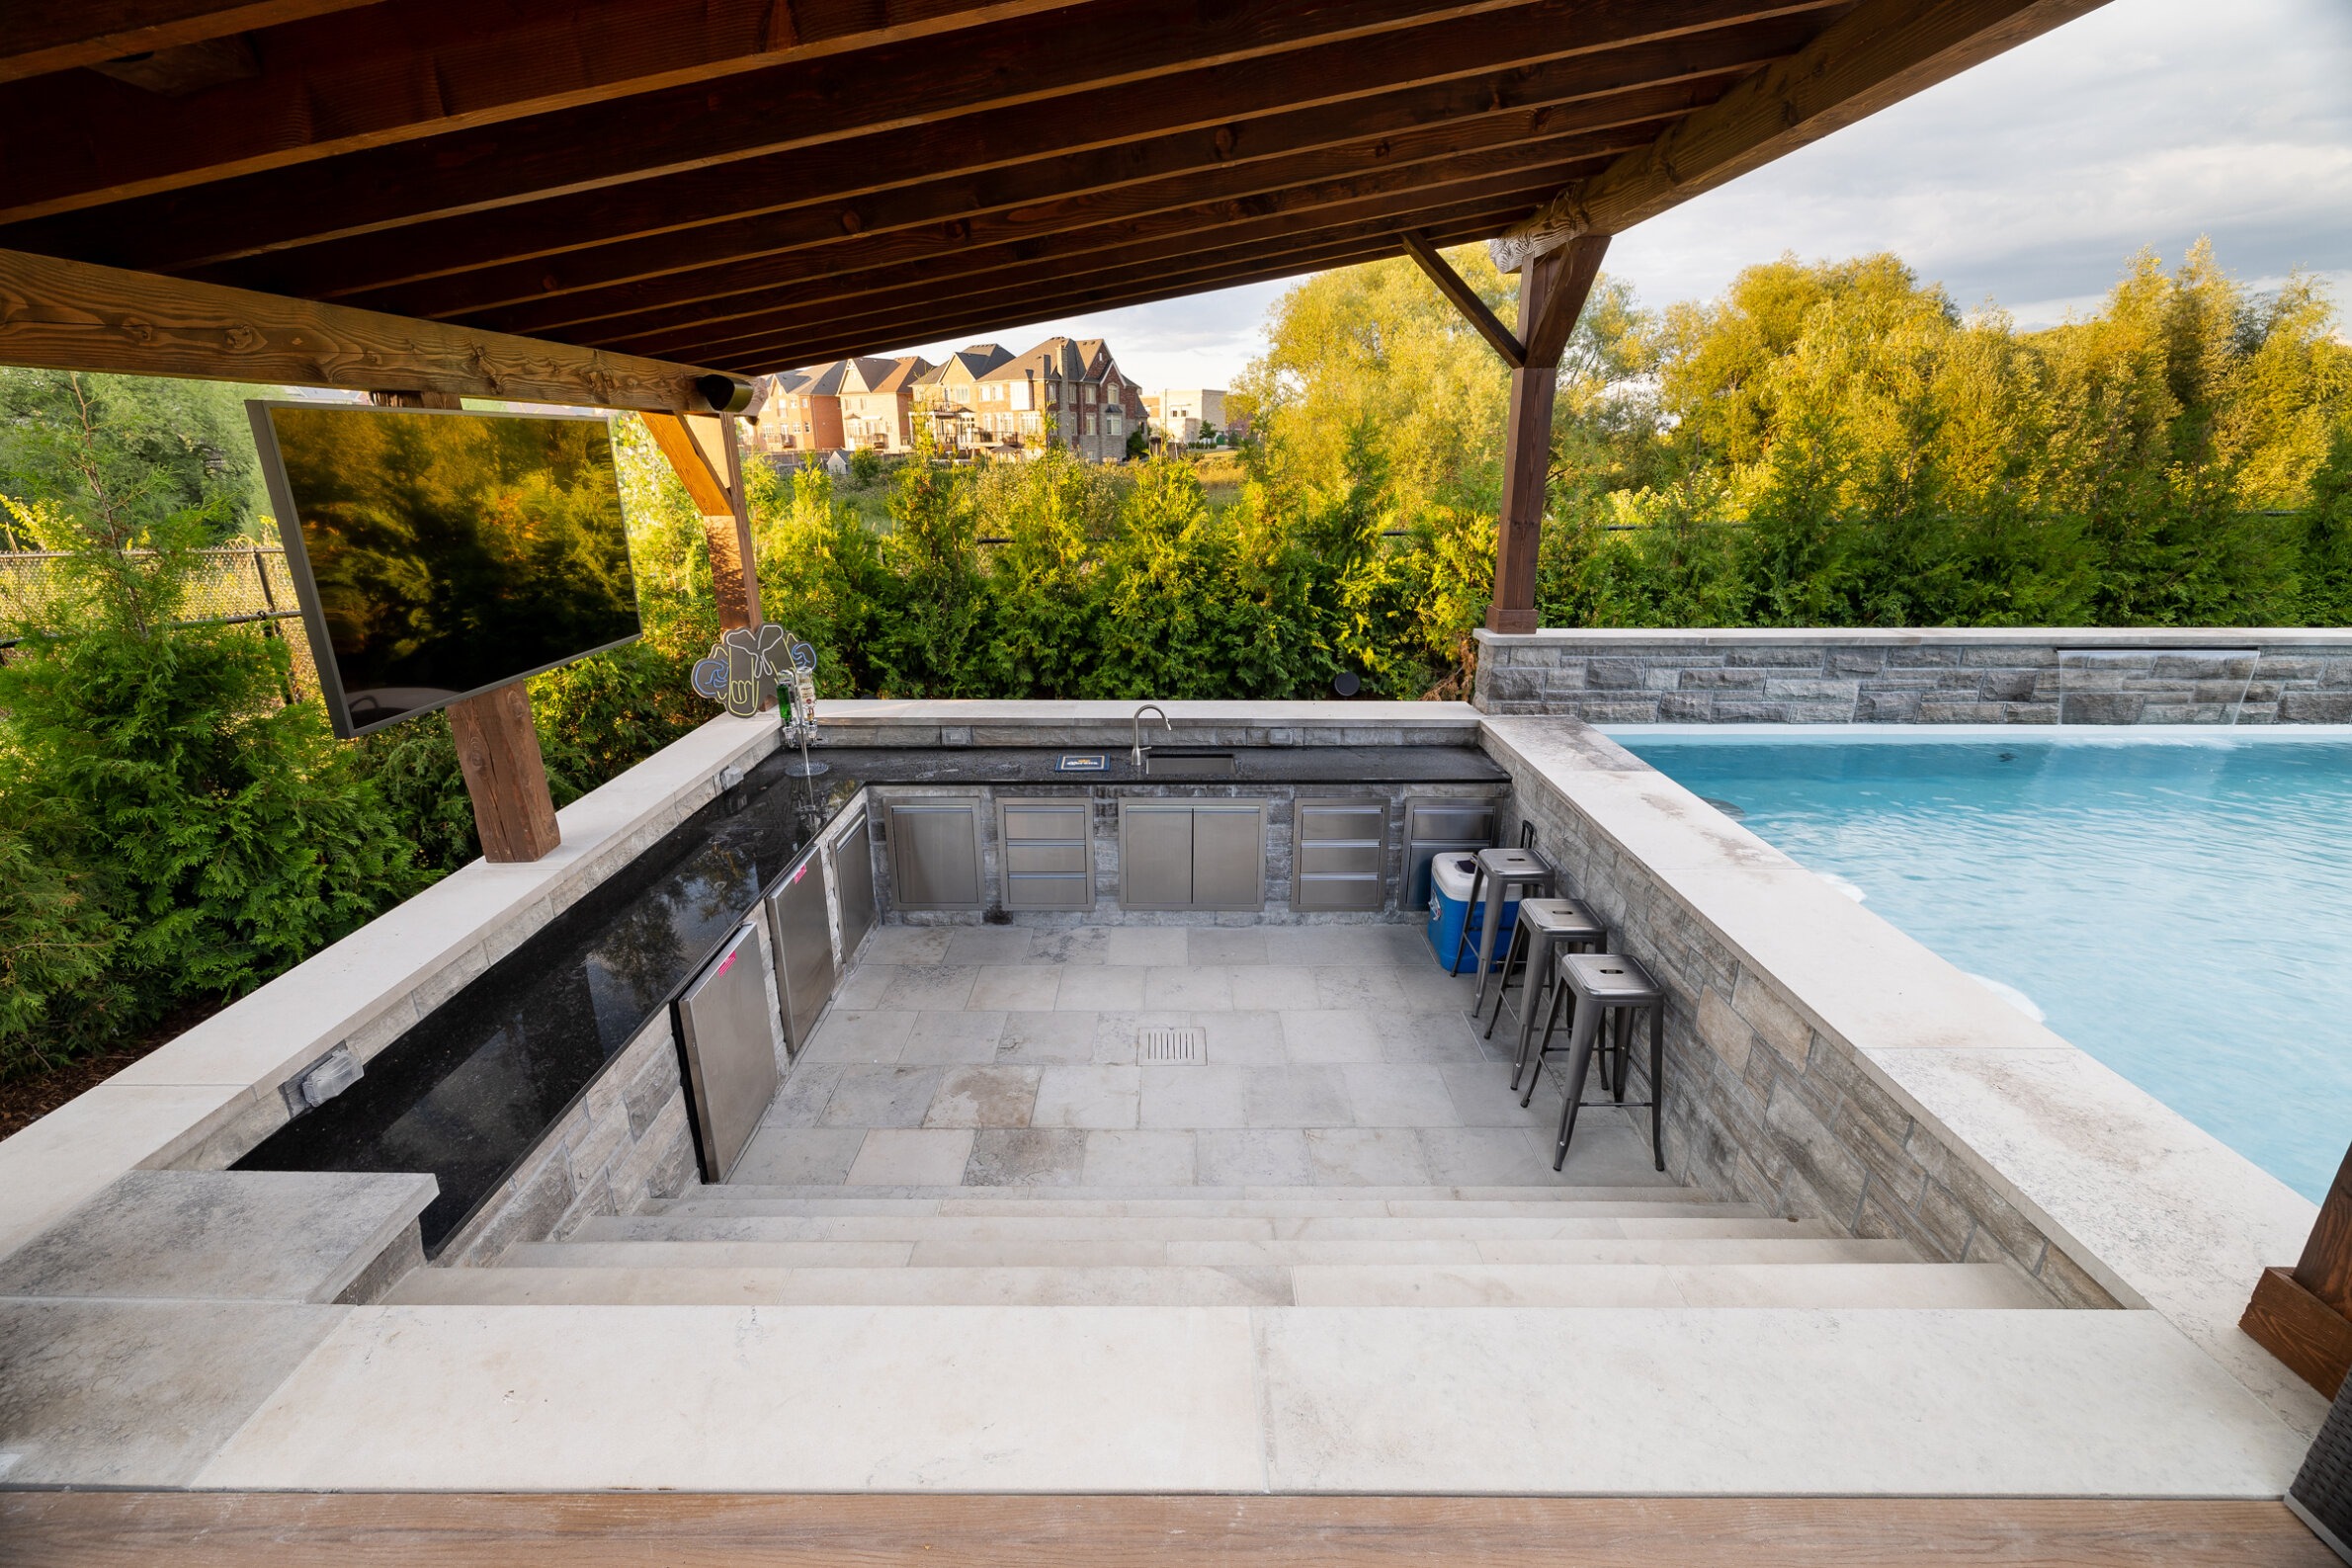 An outdoor kitchen with stainless steel cabinets adjacent to a clear, blue swimming pool. Wooden steps lead down from a covered patio area.